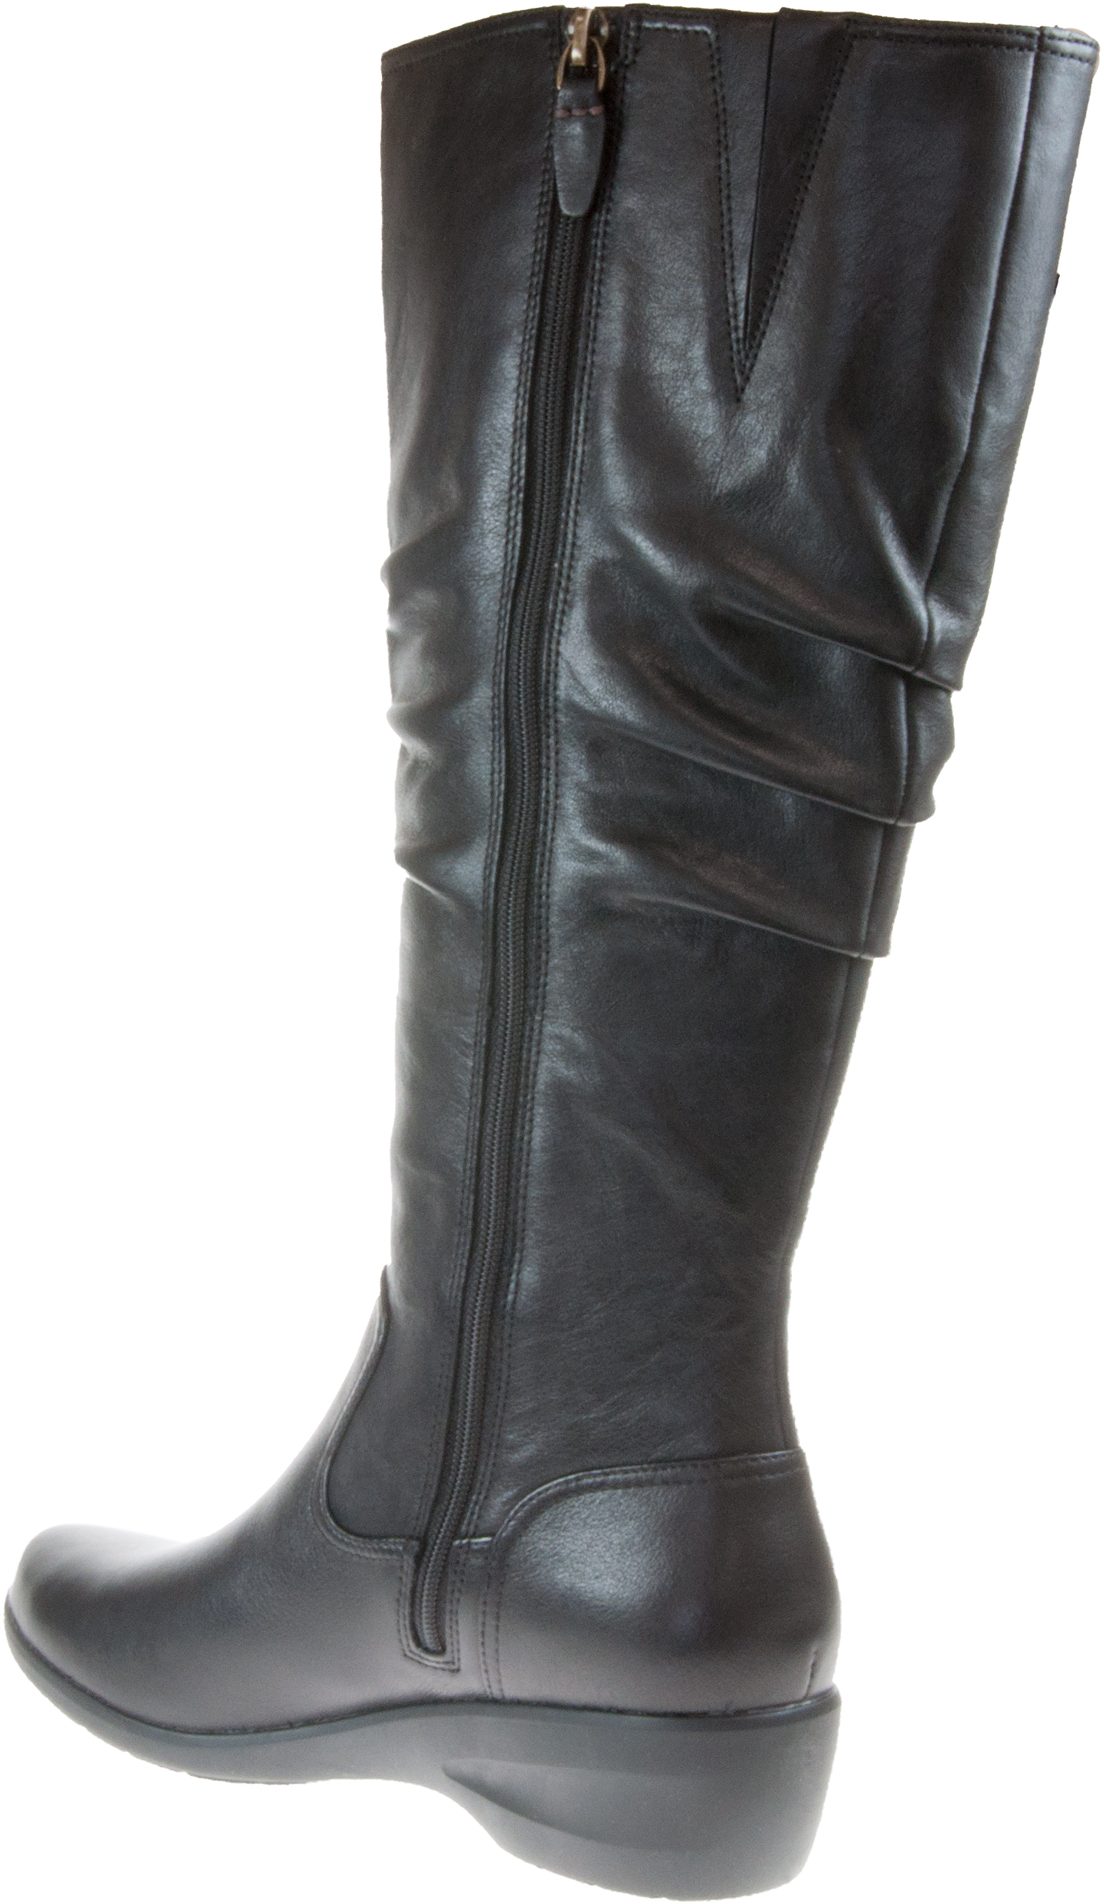 Clarks Rosely Hi Black Leather 26155538 - Knee High Boots - Humphries Shoes